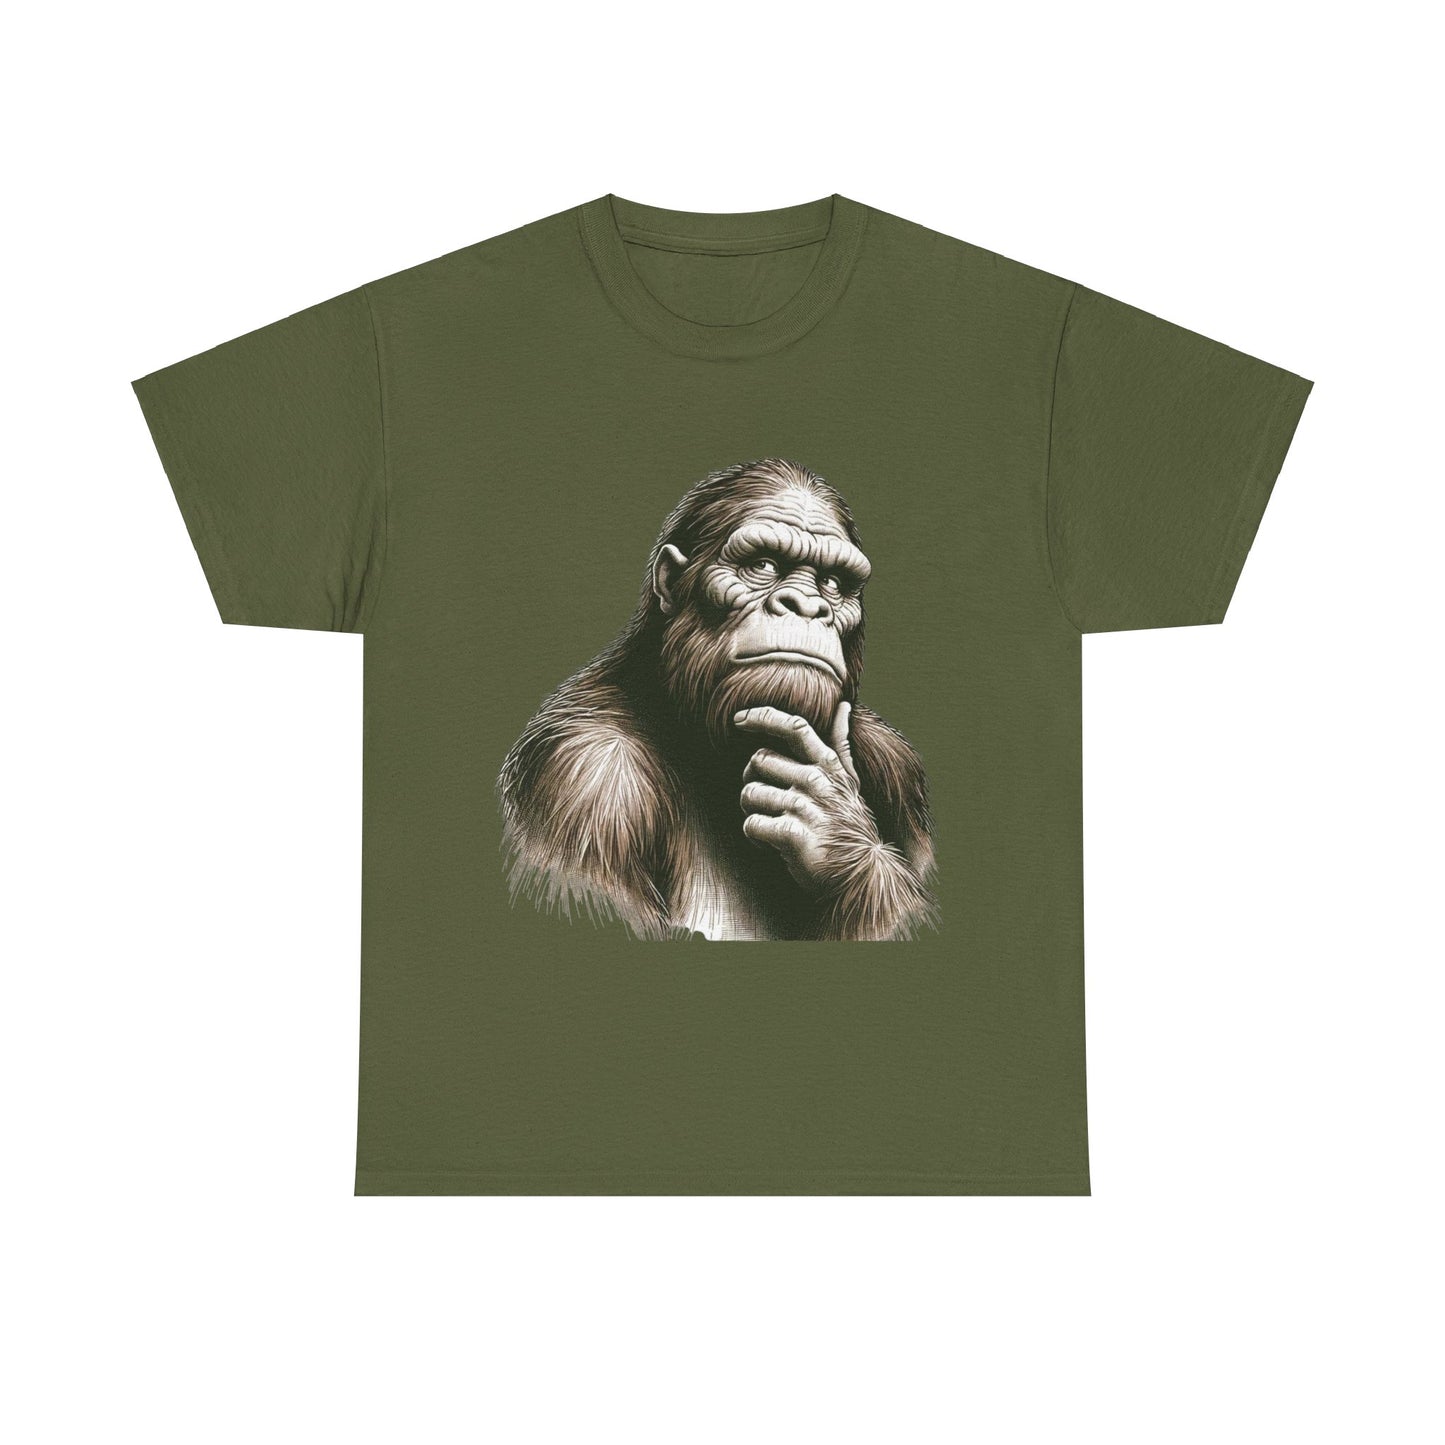 Thoughtful Squatch Cotton Tee